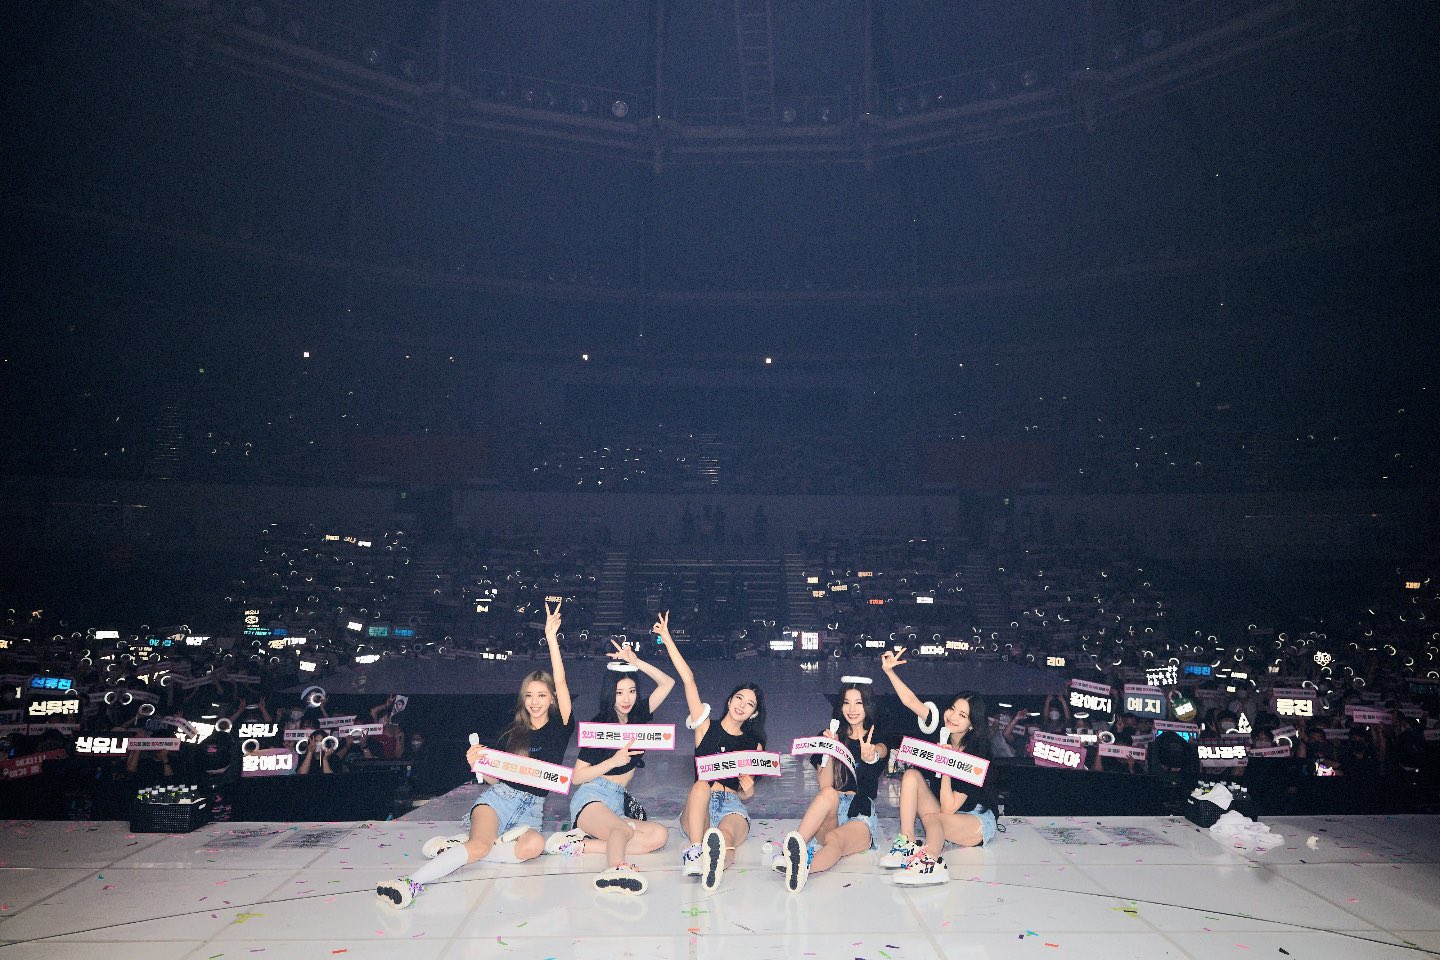 ITZY, THE 1ST WORLD TOUR <CHECKMATE> Seoul concert success "I feel I lived for this moment"